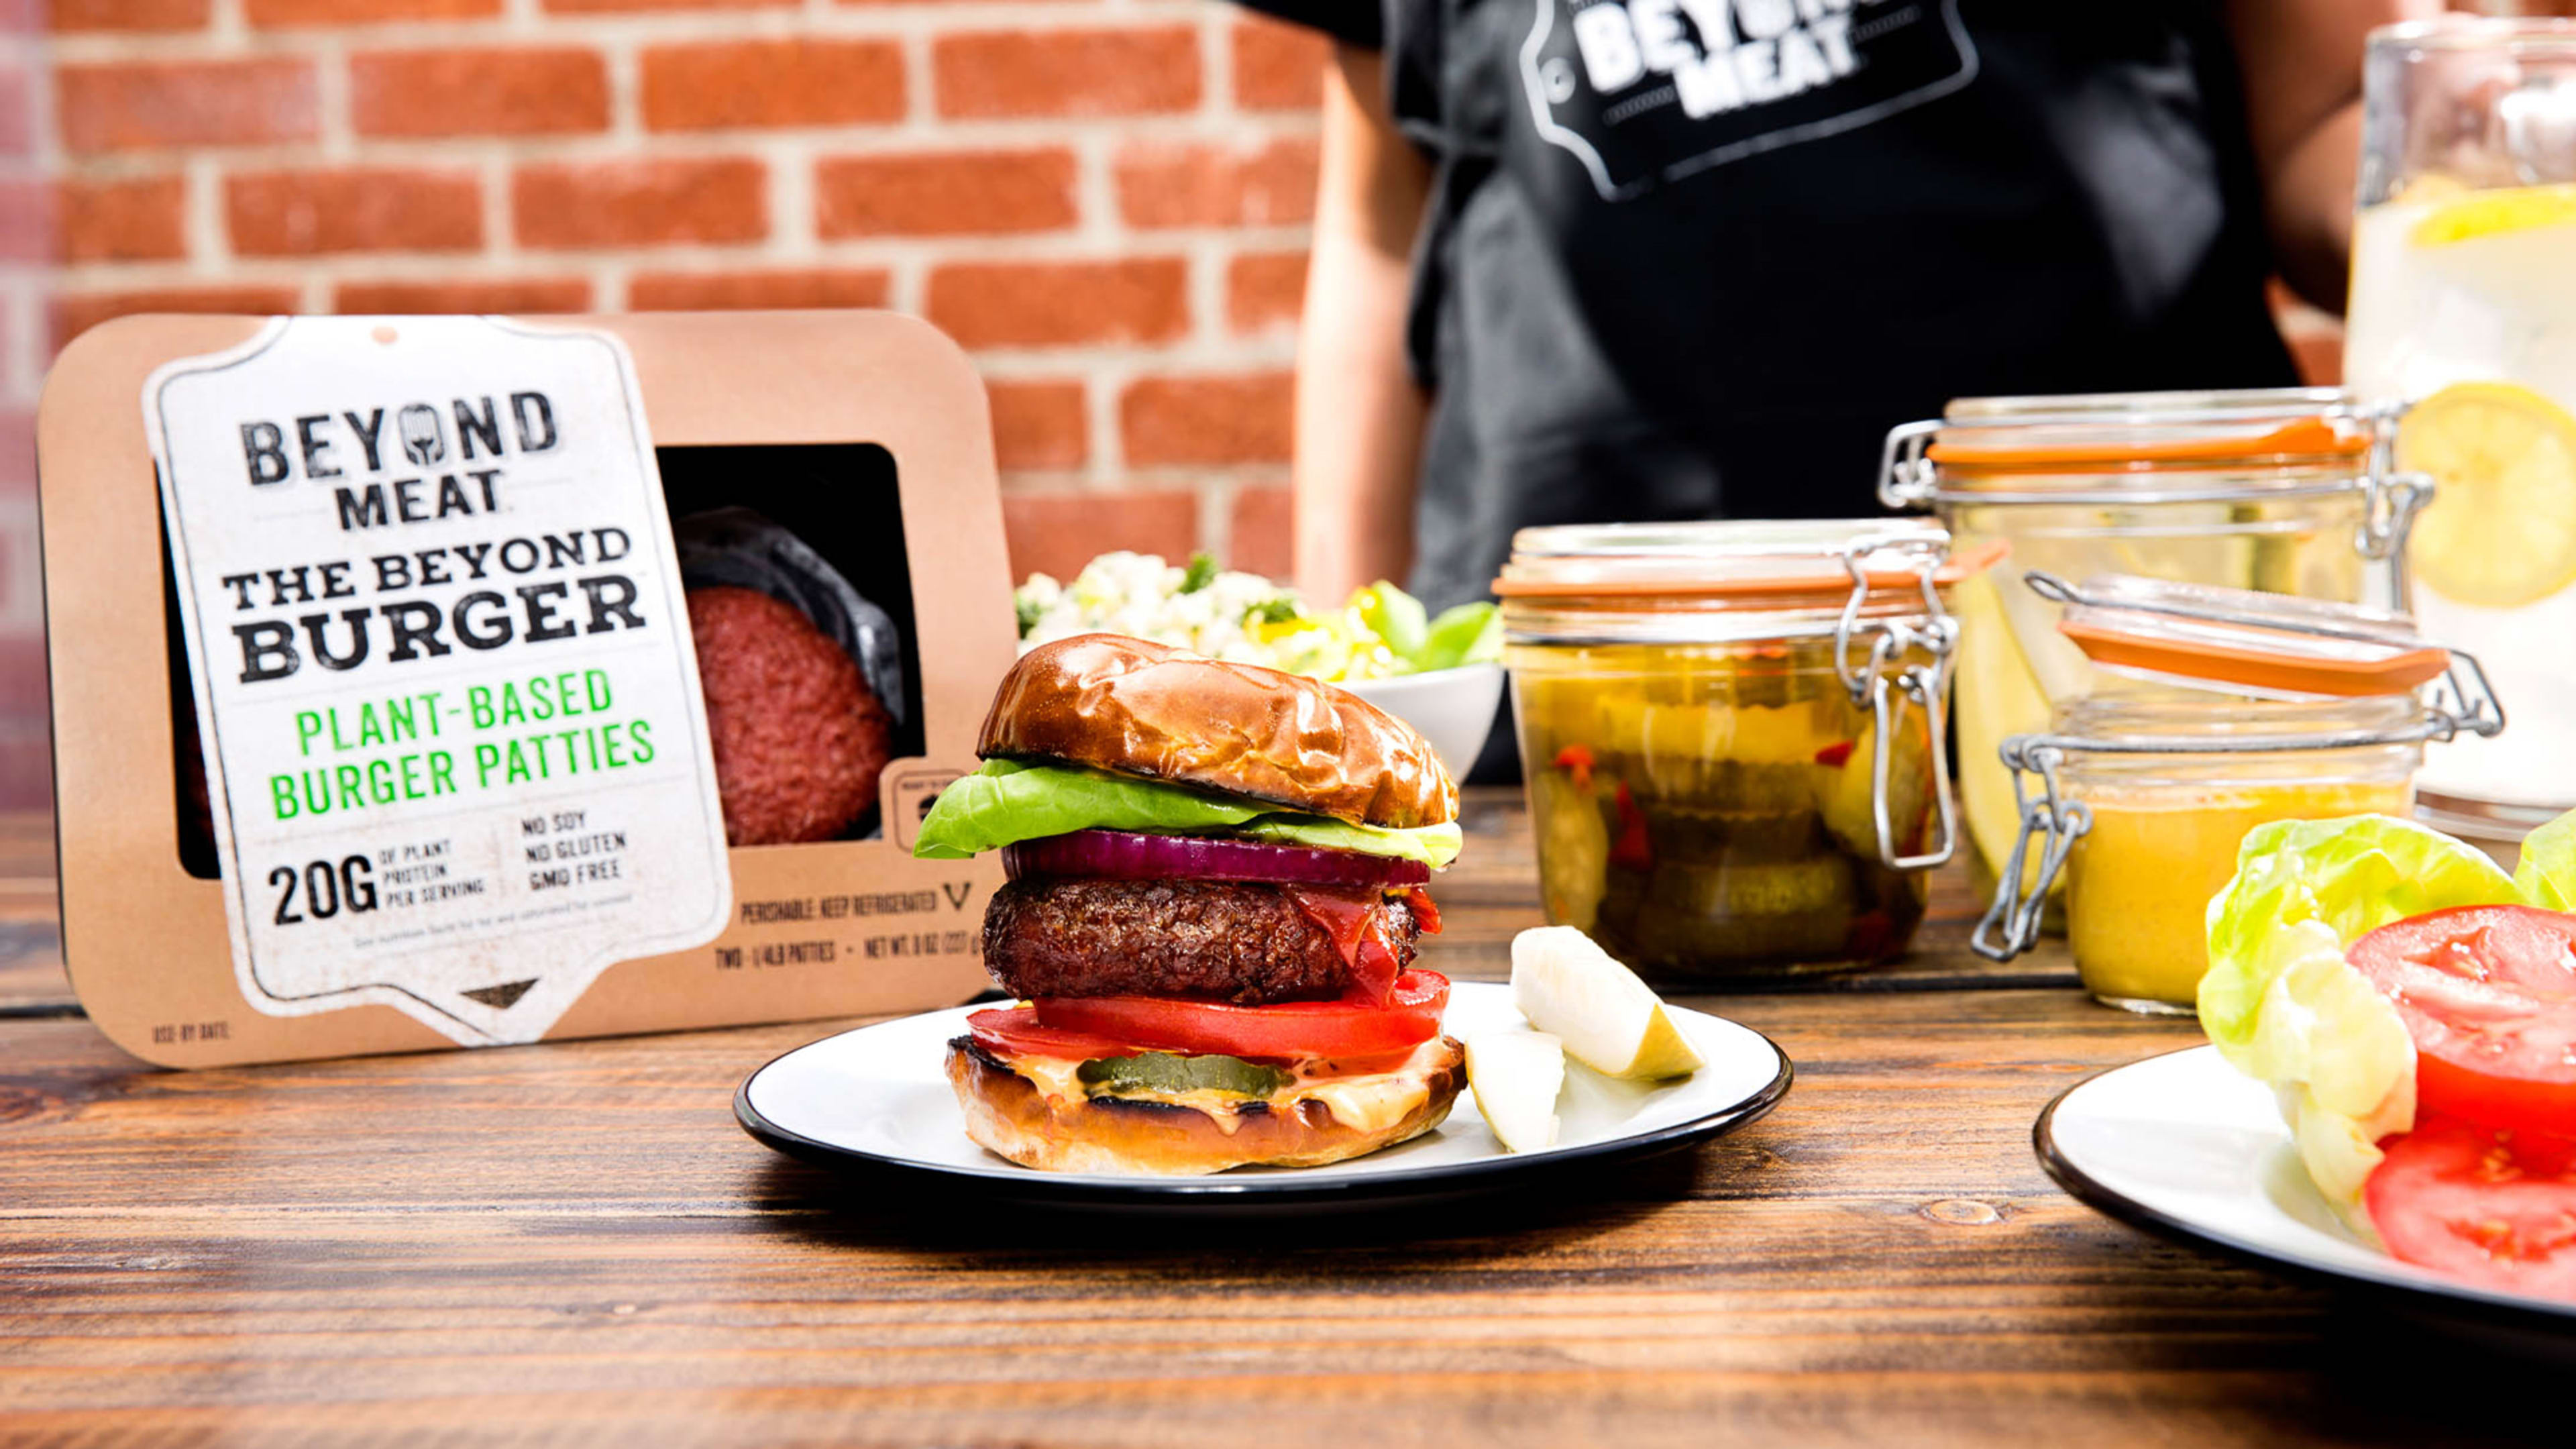 Beyond Meat warns it may never be profitable in IPO filing